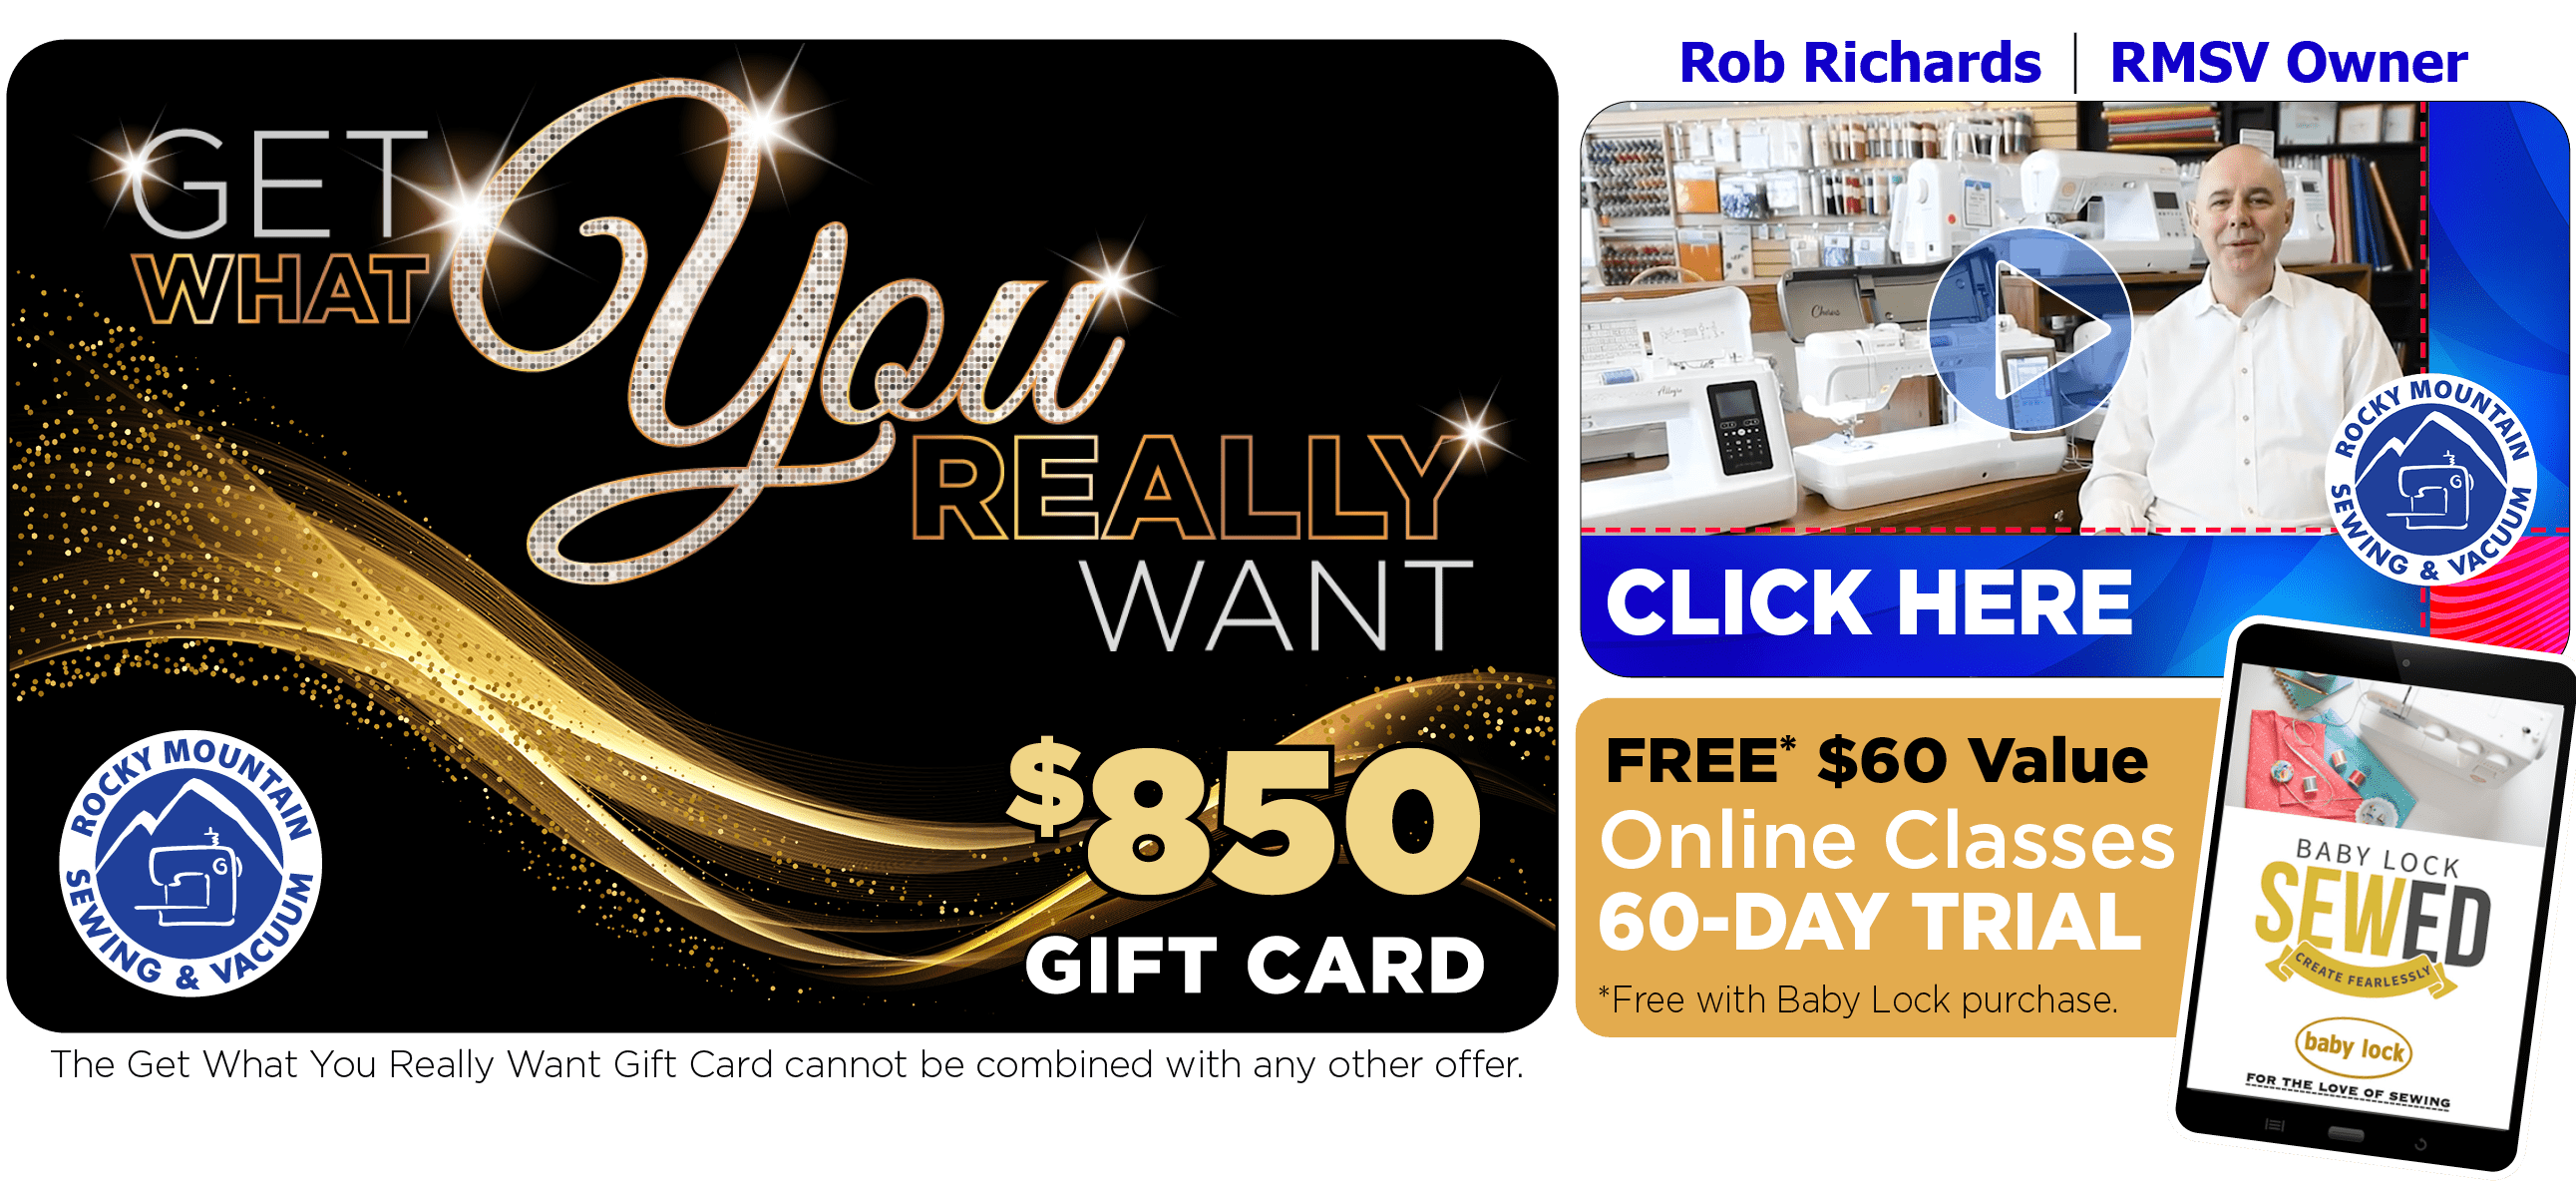 Get What You Really Want $850 Gift Card with Purchase